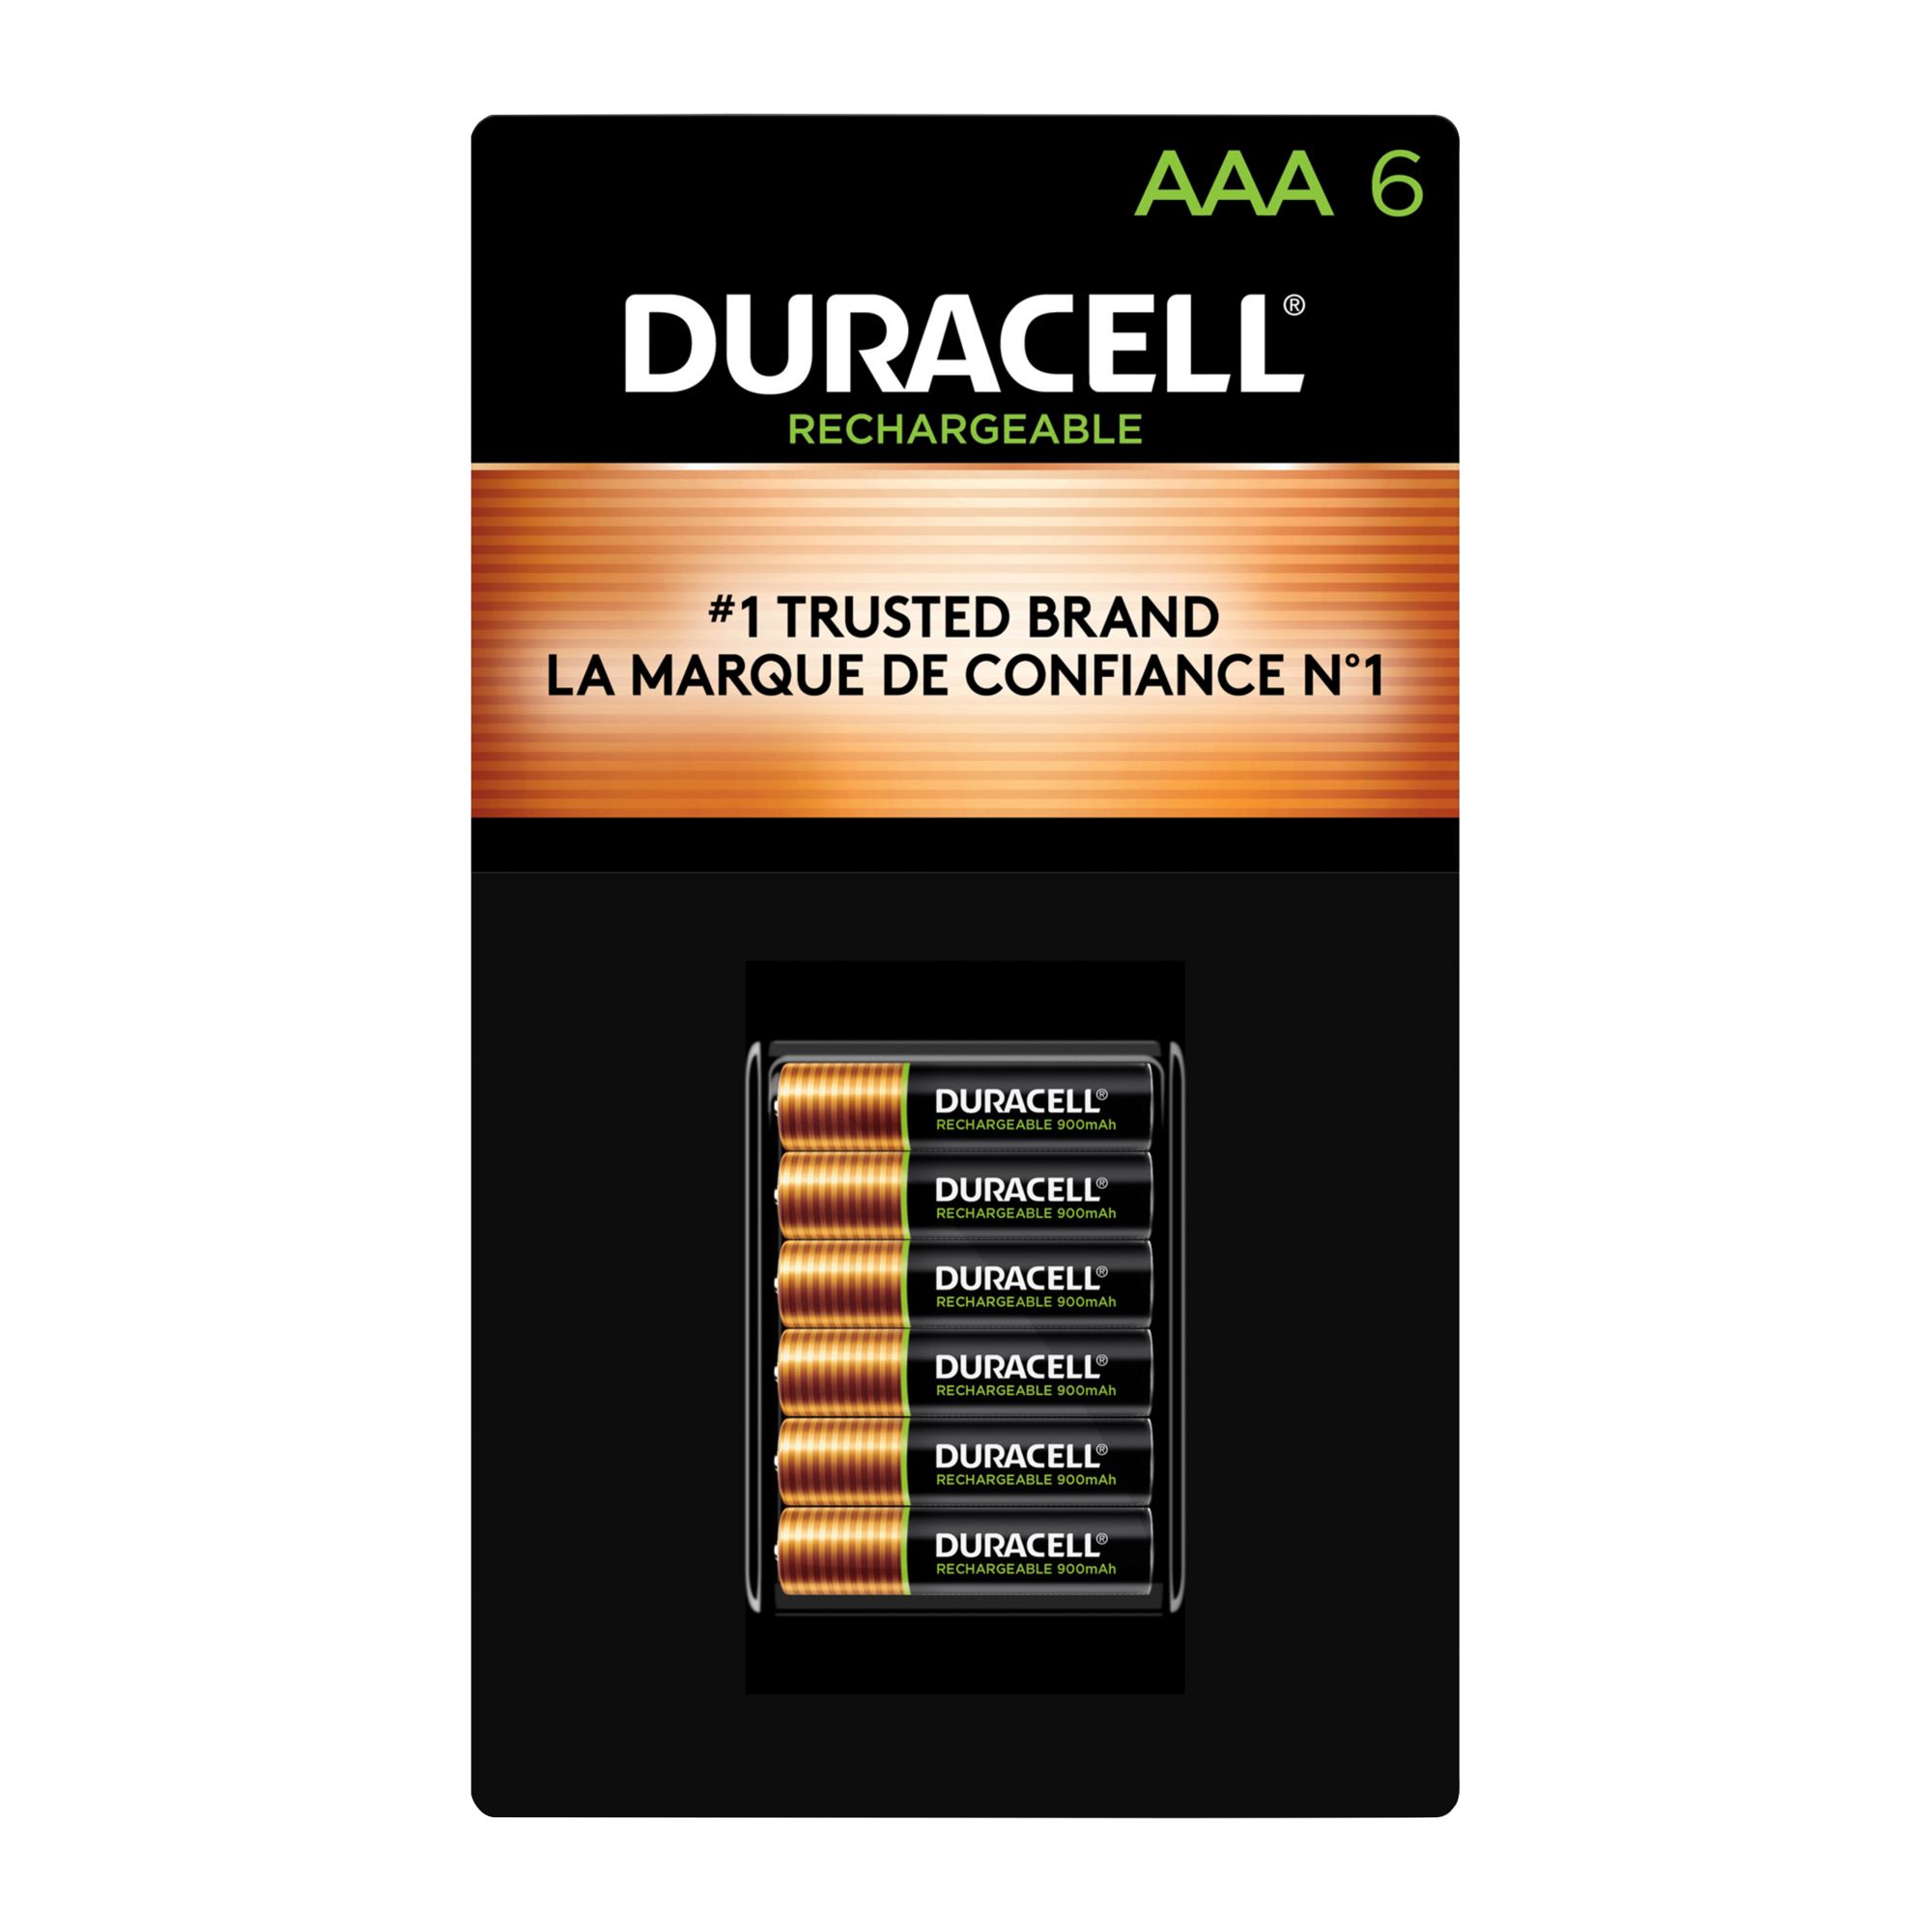 DURACELL Rechargeable AAA 900 mAh